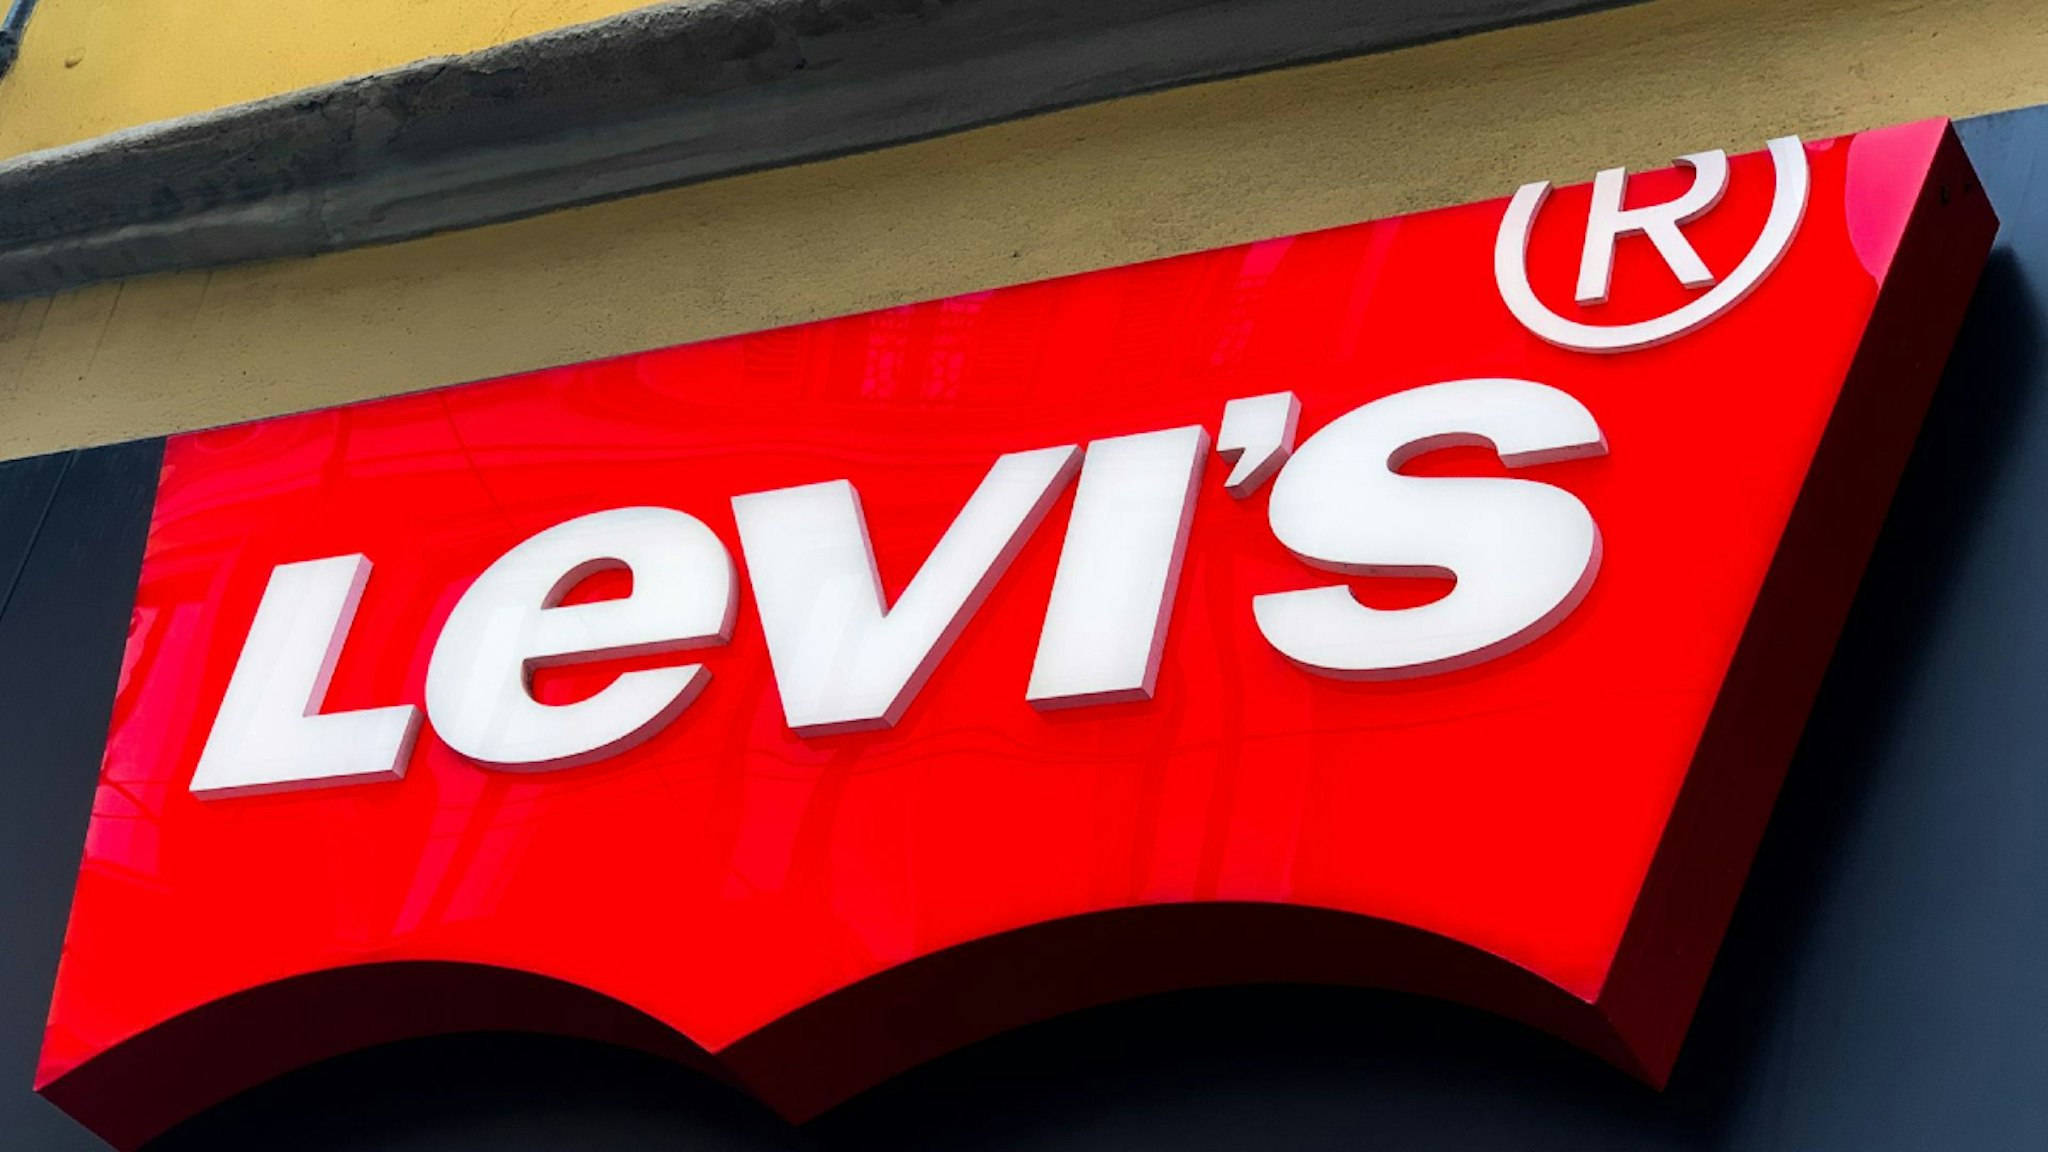 Levi's logo is seen at the store in Milan, Italy on October 6, 2021.